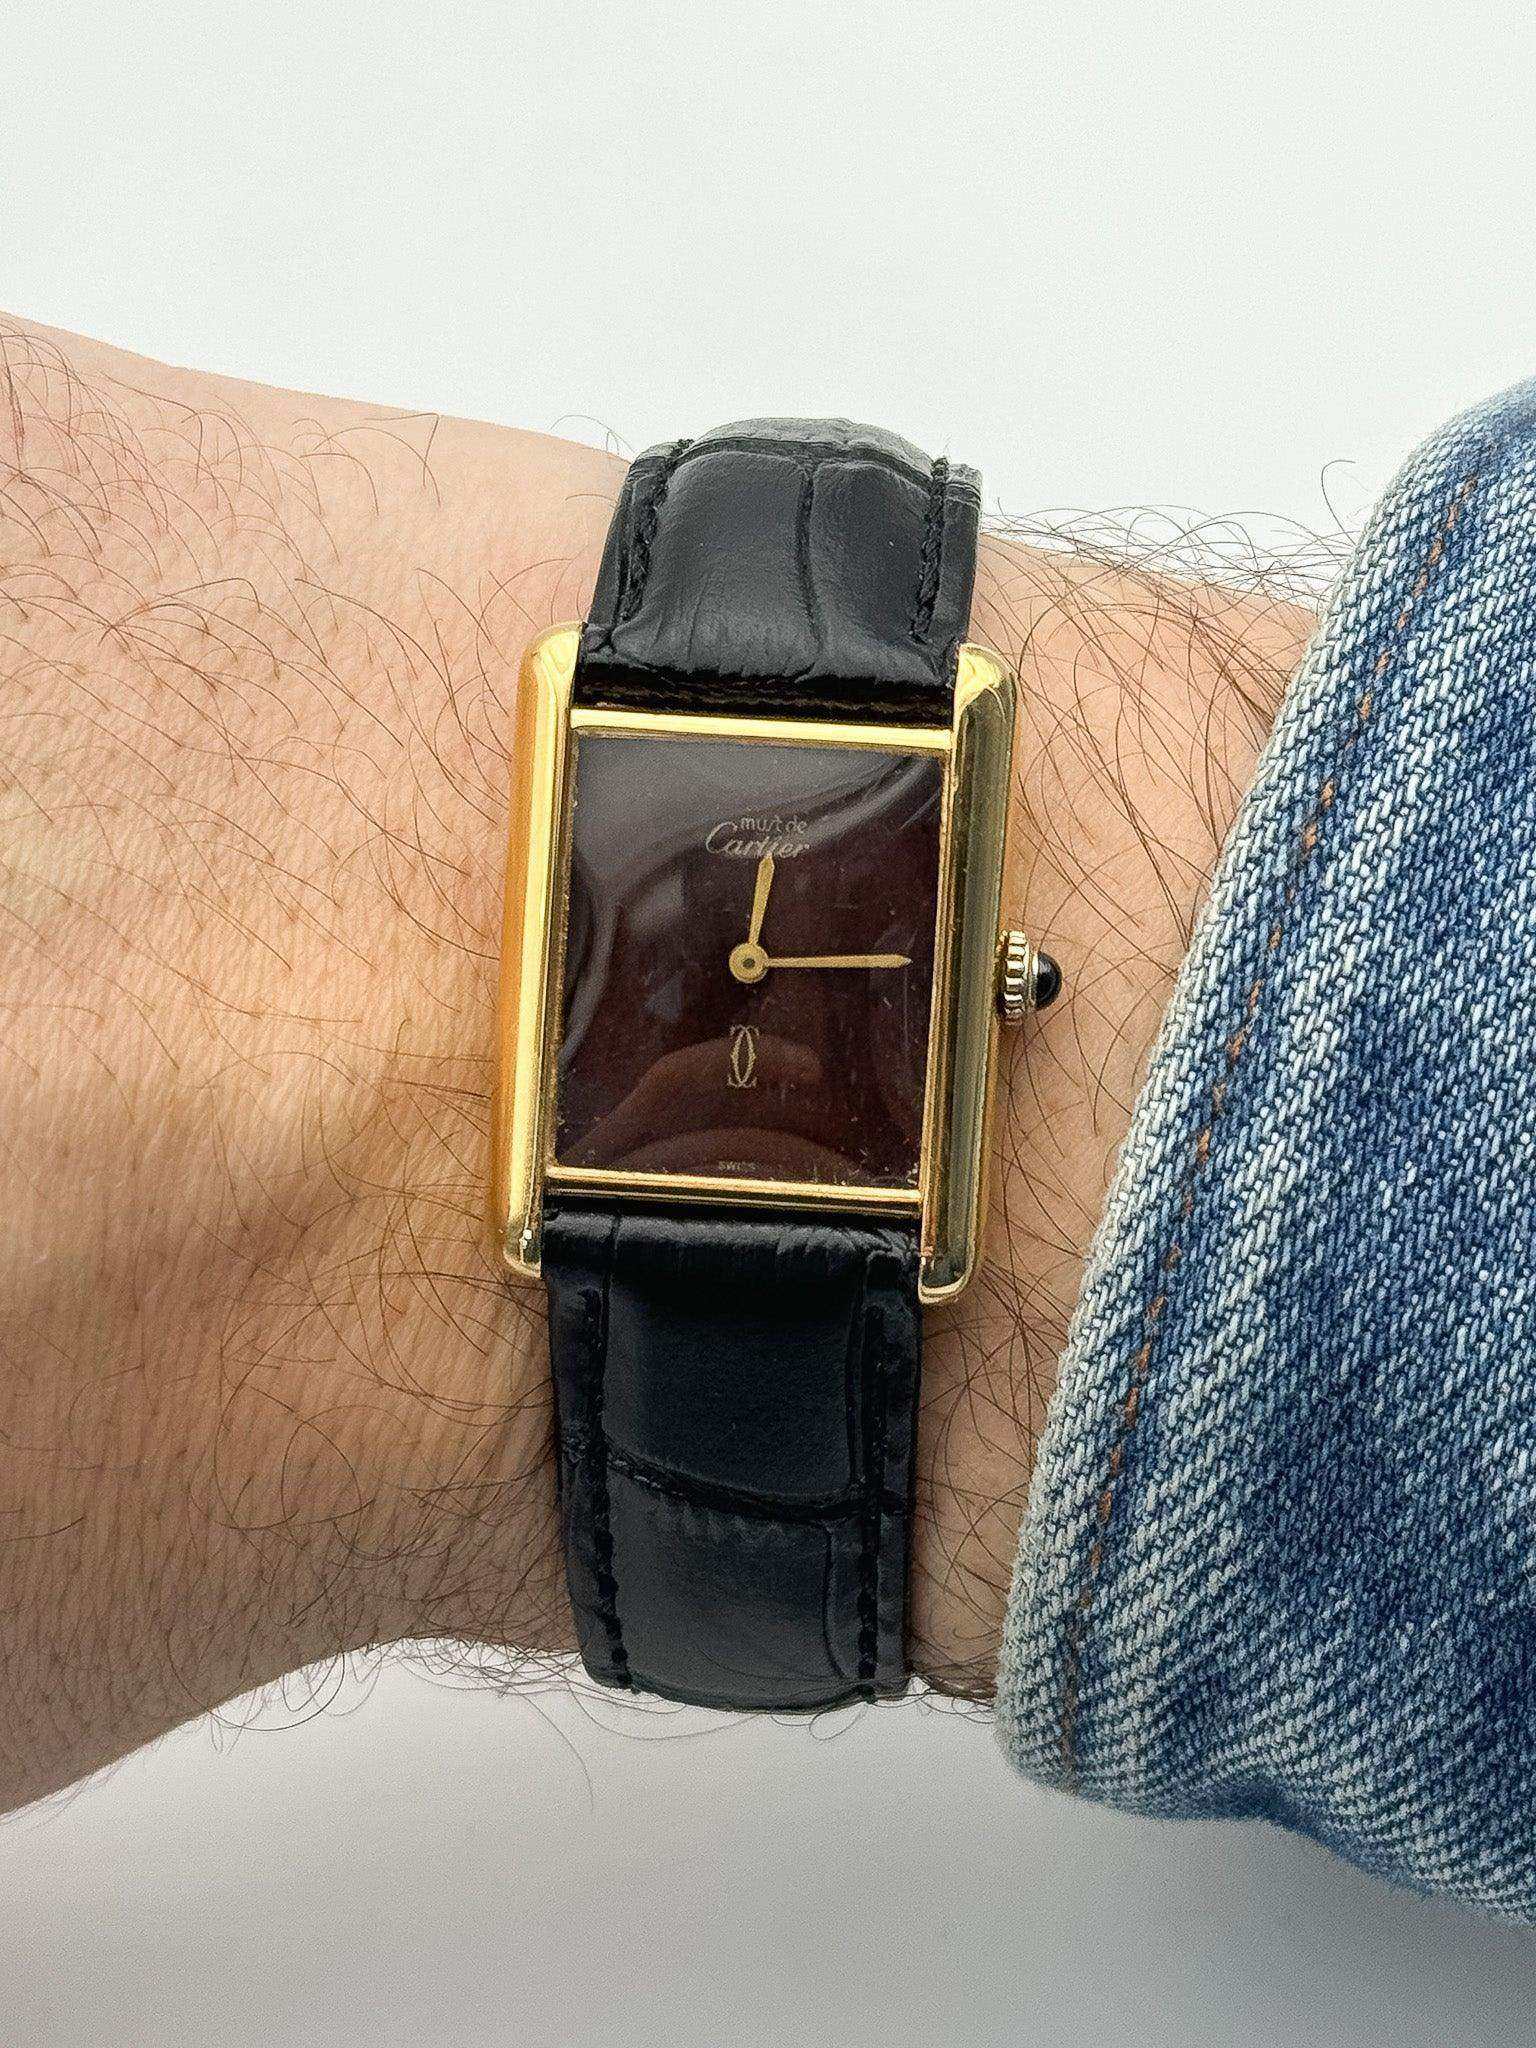 Cartier - Tank Must Wood Spider Dial - 1980’s - Atelier Victor